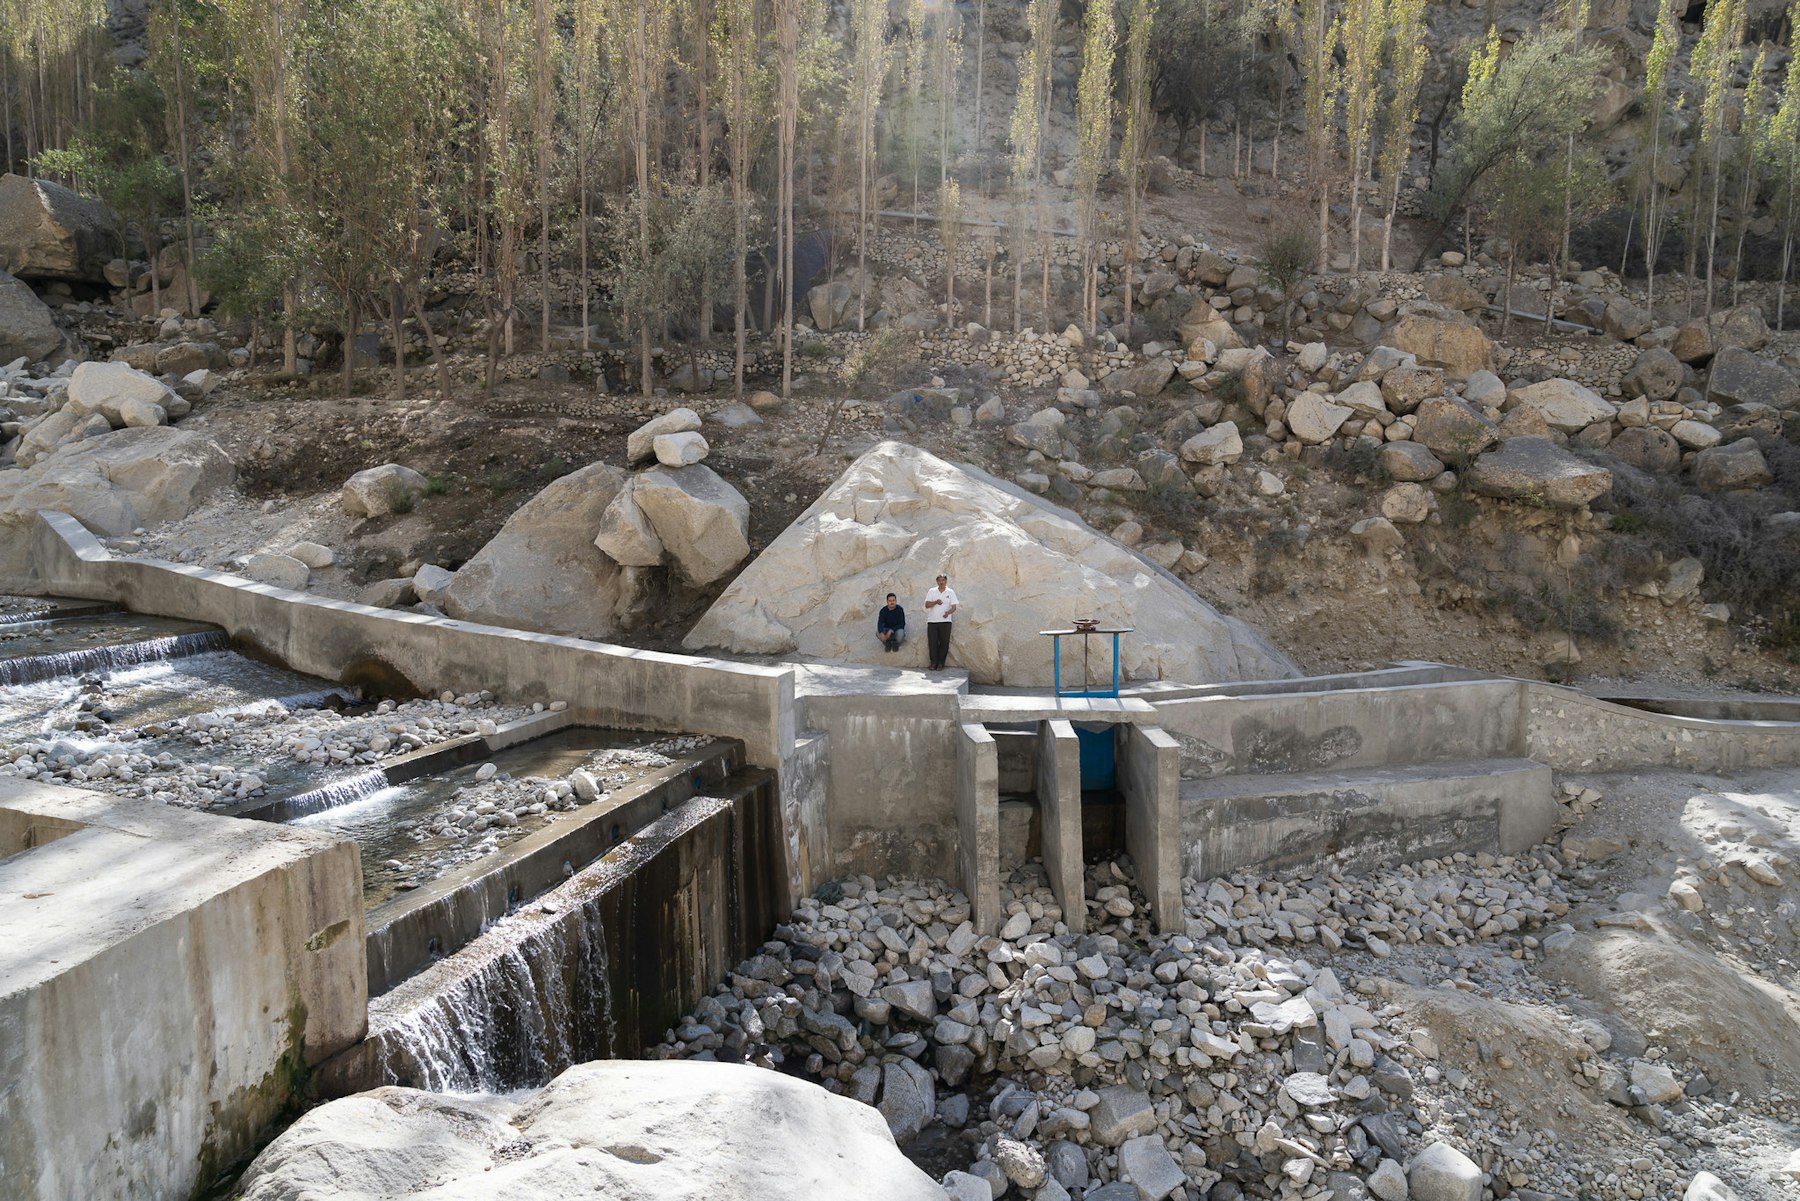 Larger and more modern irrigation channels have allowed many more people to easily access water